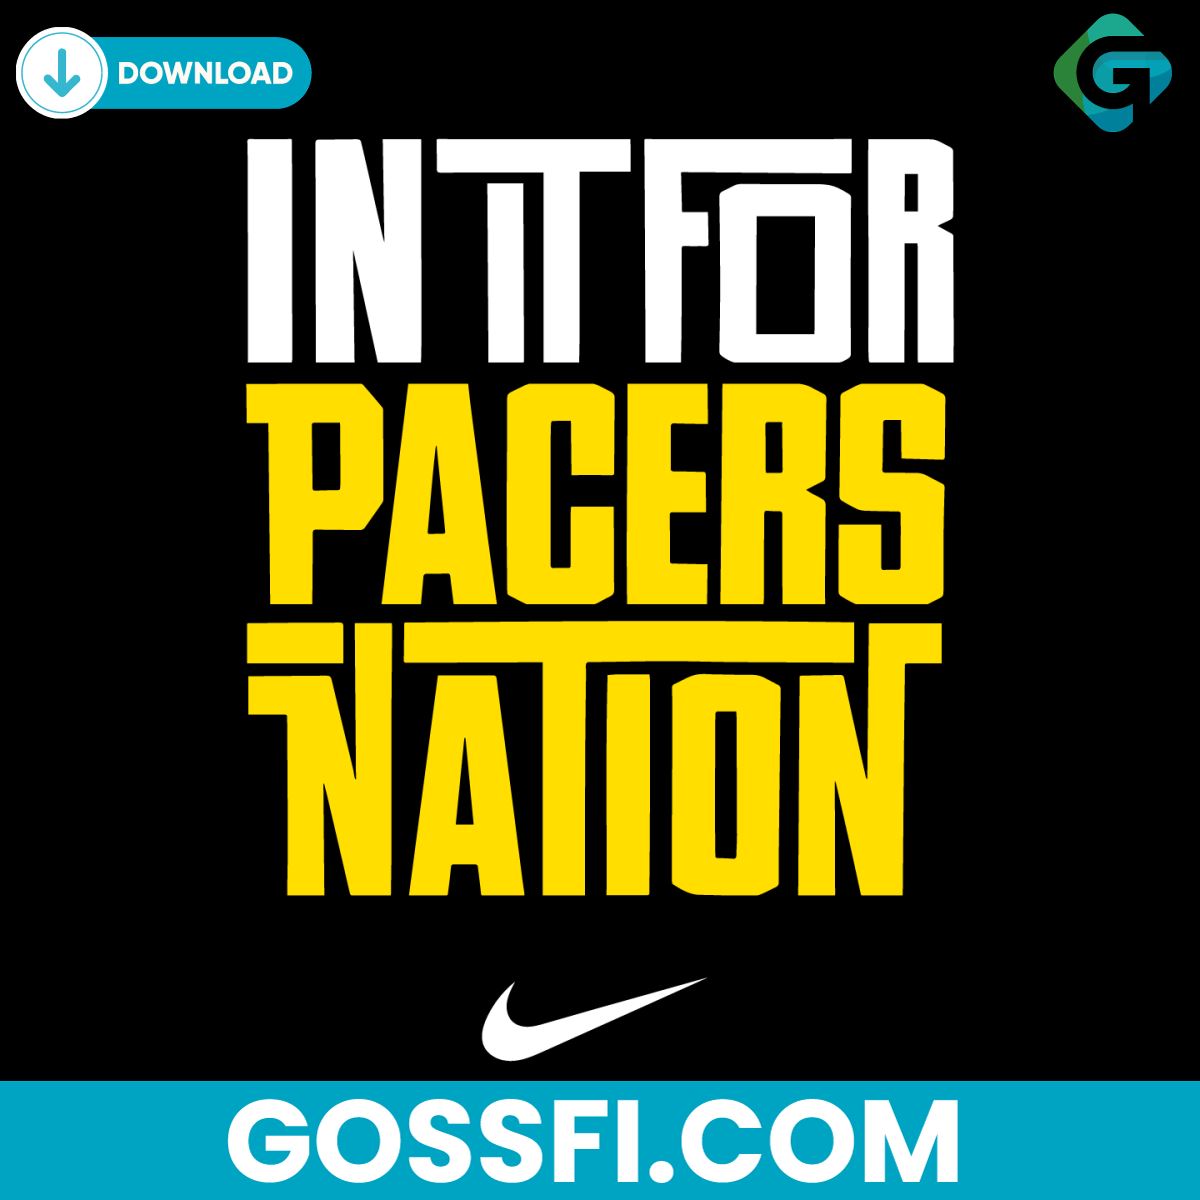 in-it-for-pacers-nation-basketball-nba-svg-digital-download